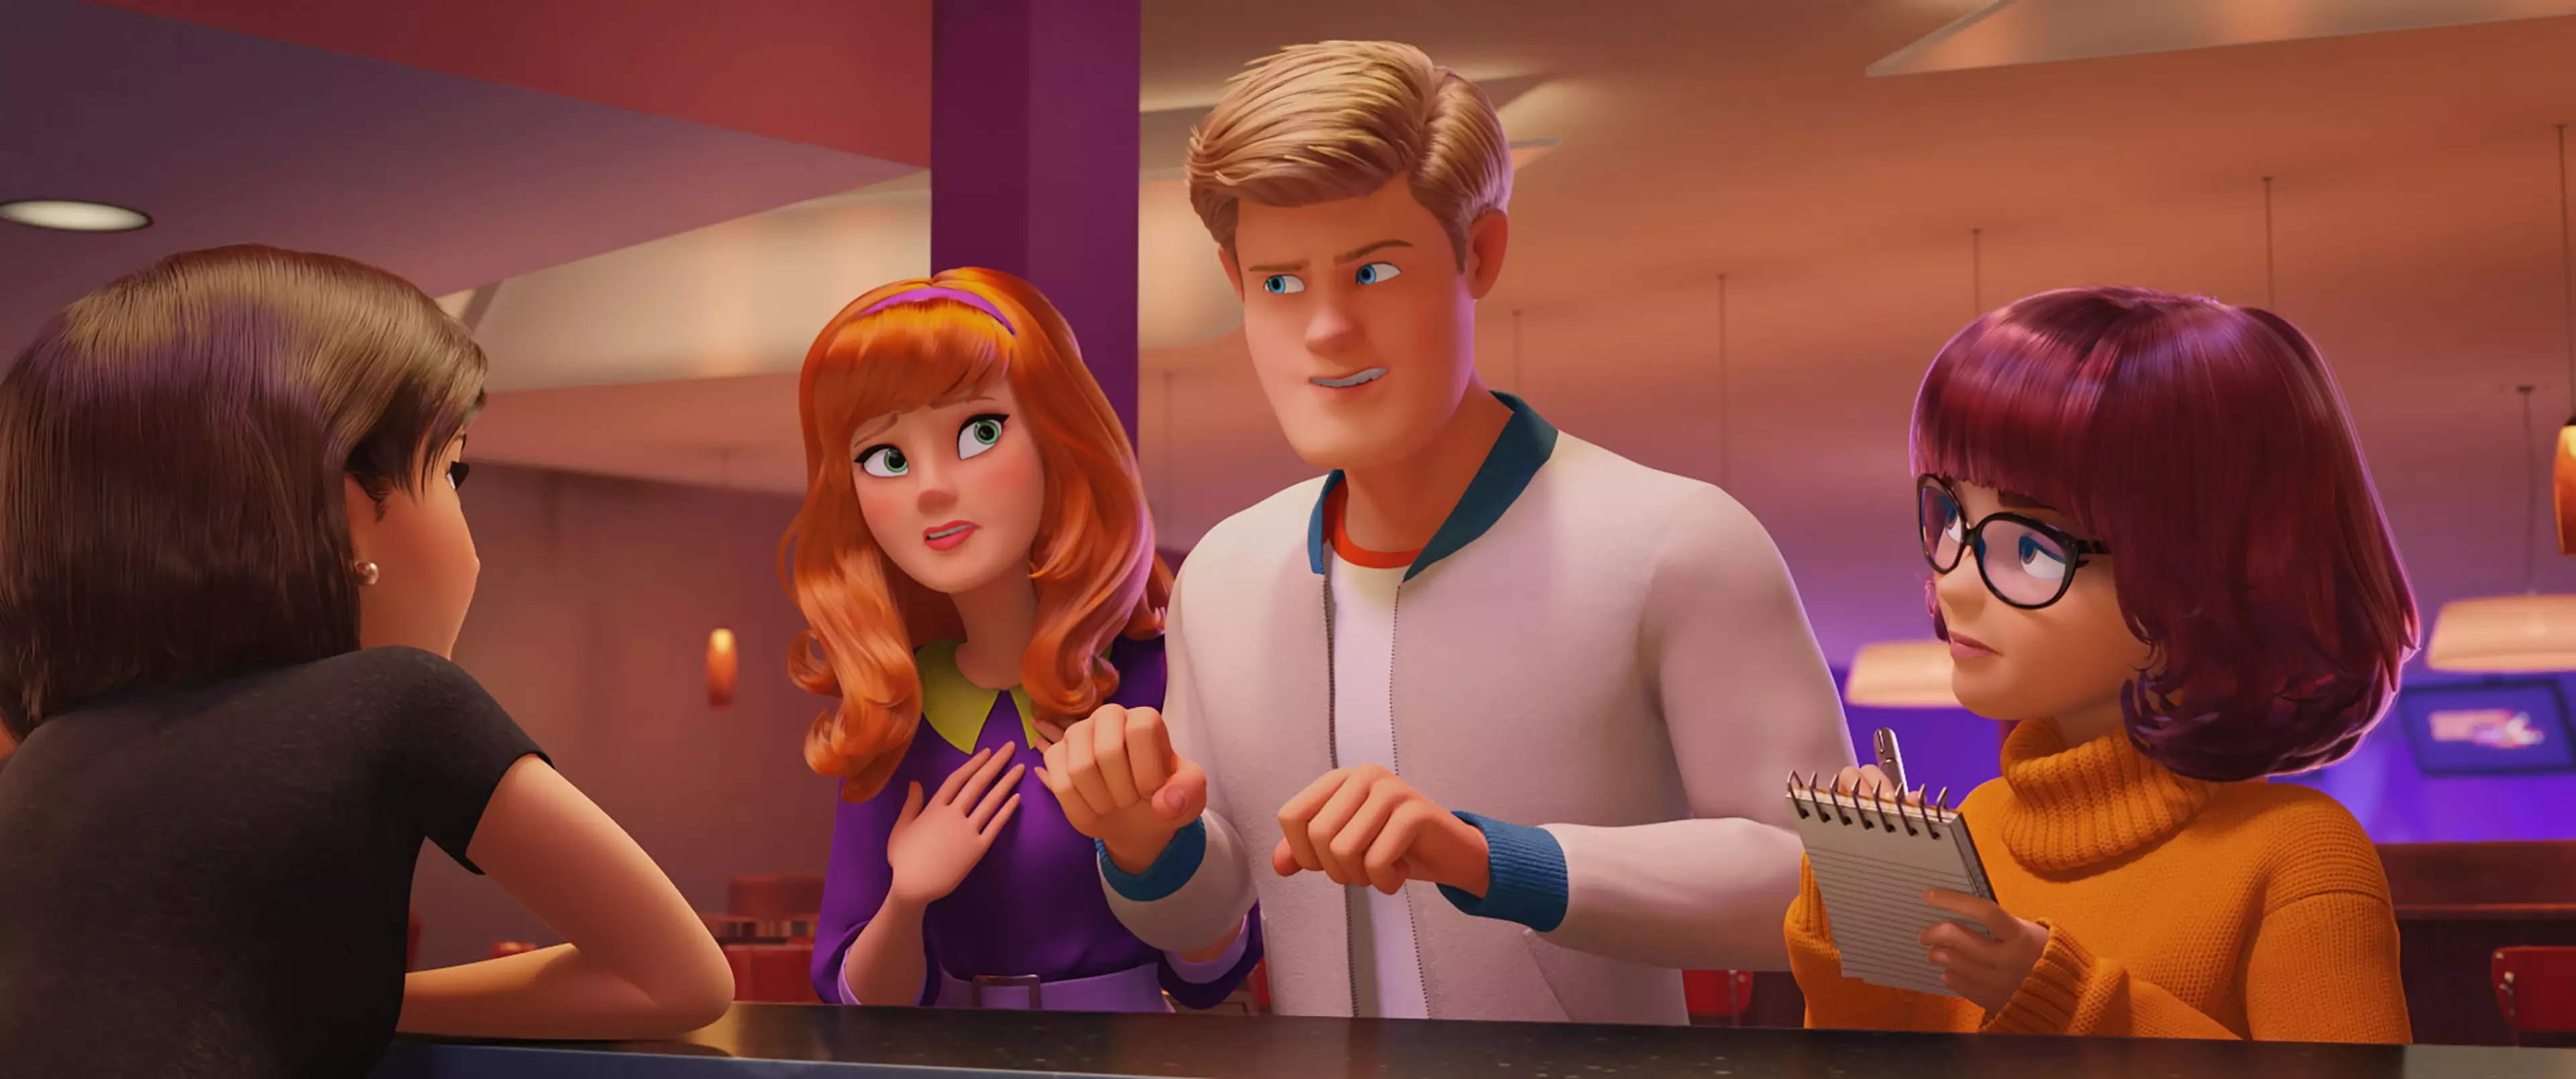 The Mystery Incorporated gang have received a makeover in the new animated Scoob movie (